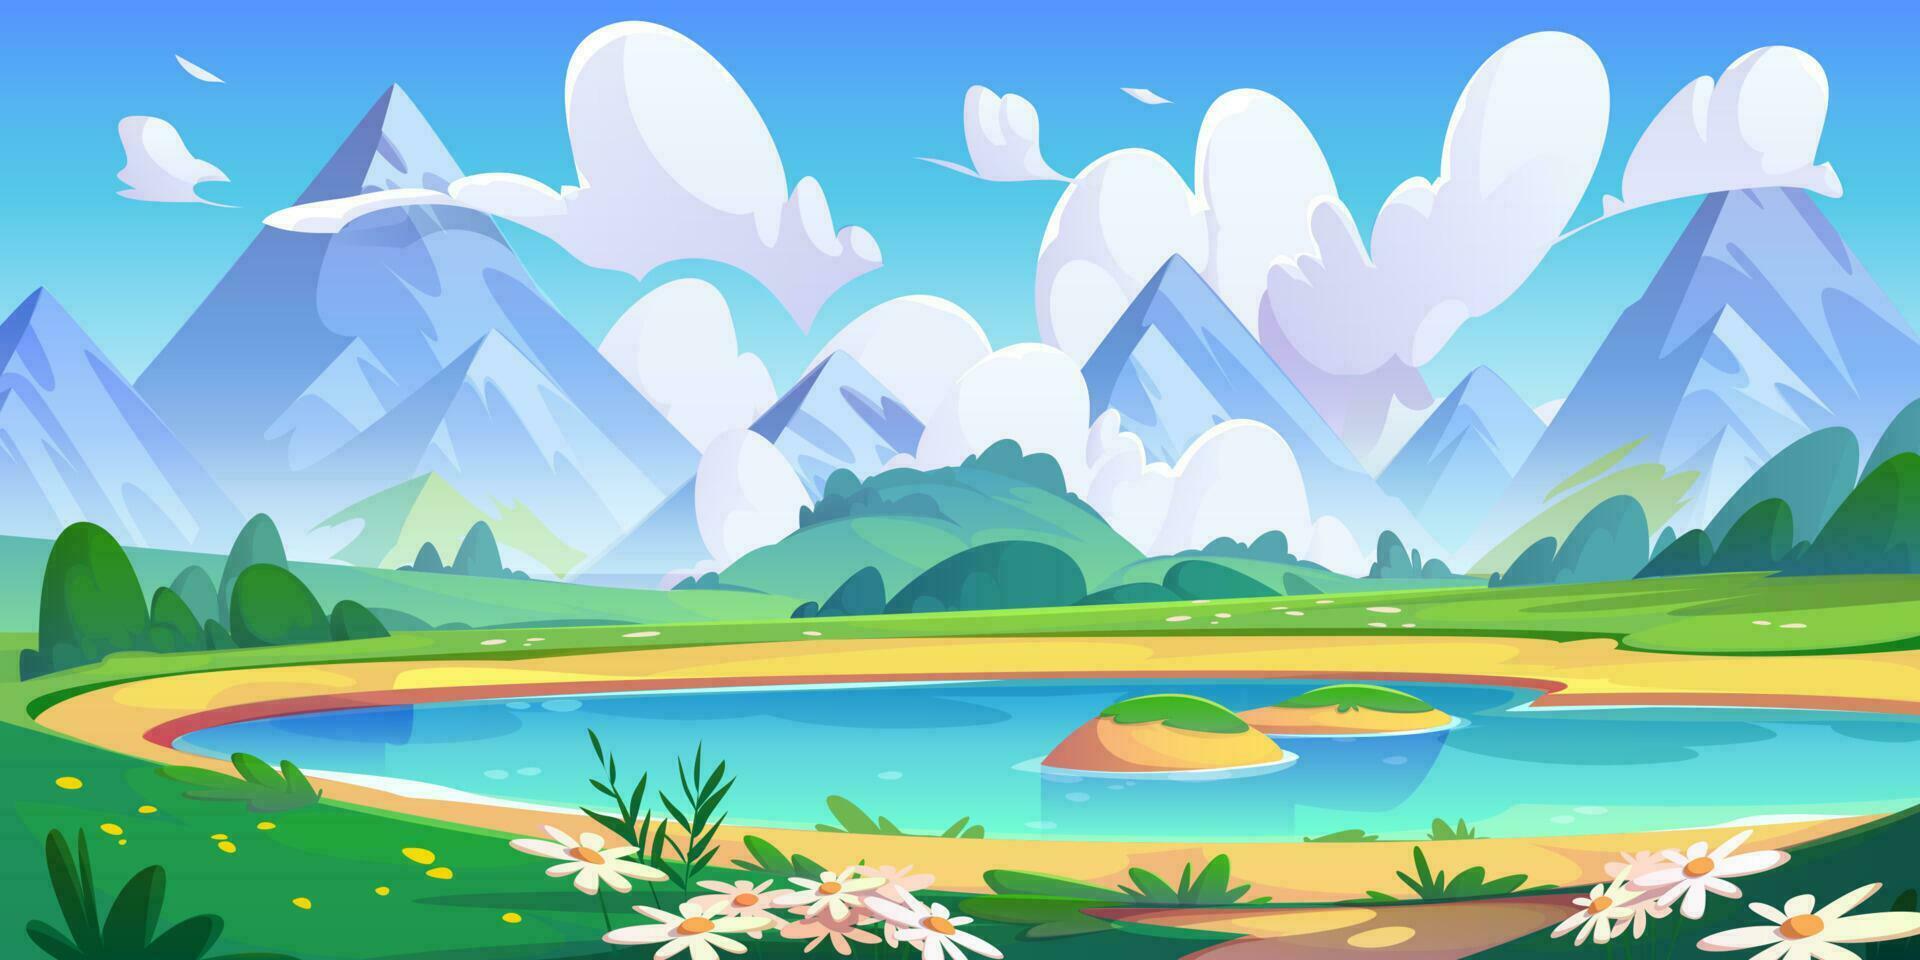 Lake and spring flower field mountain landscape vector